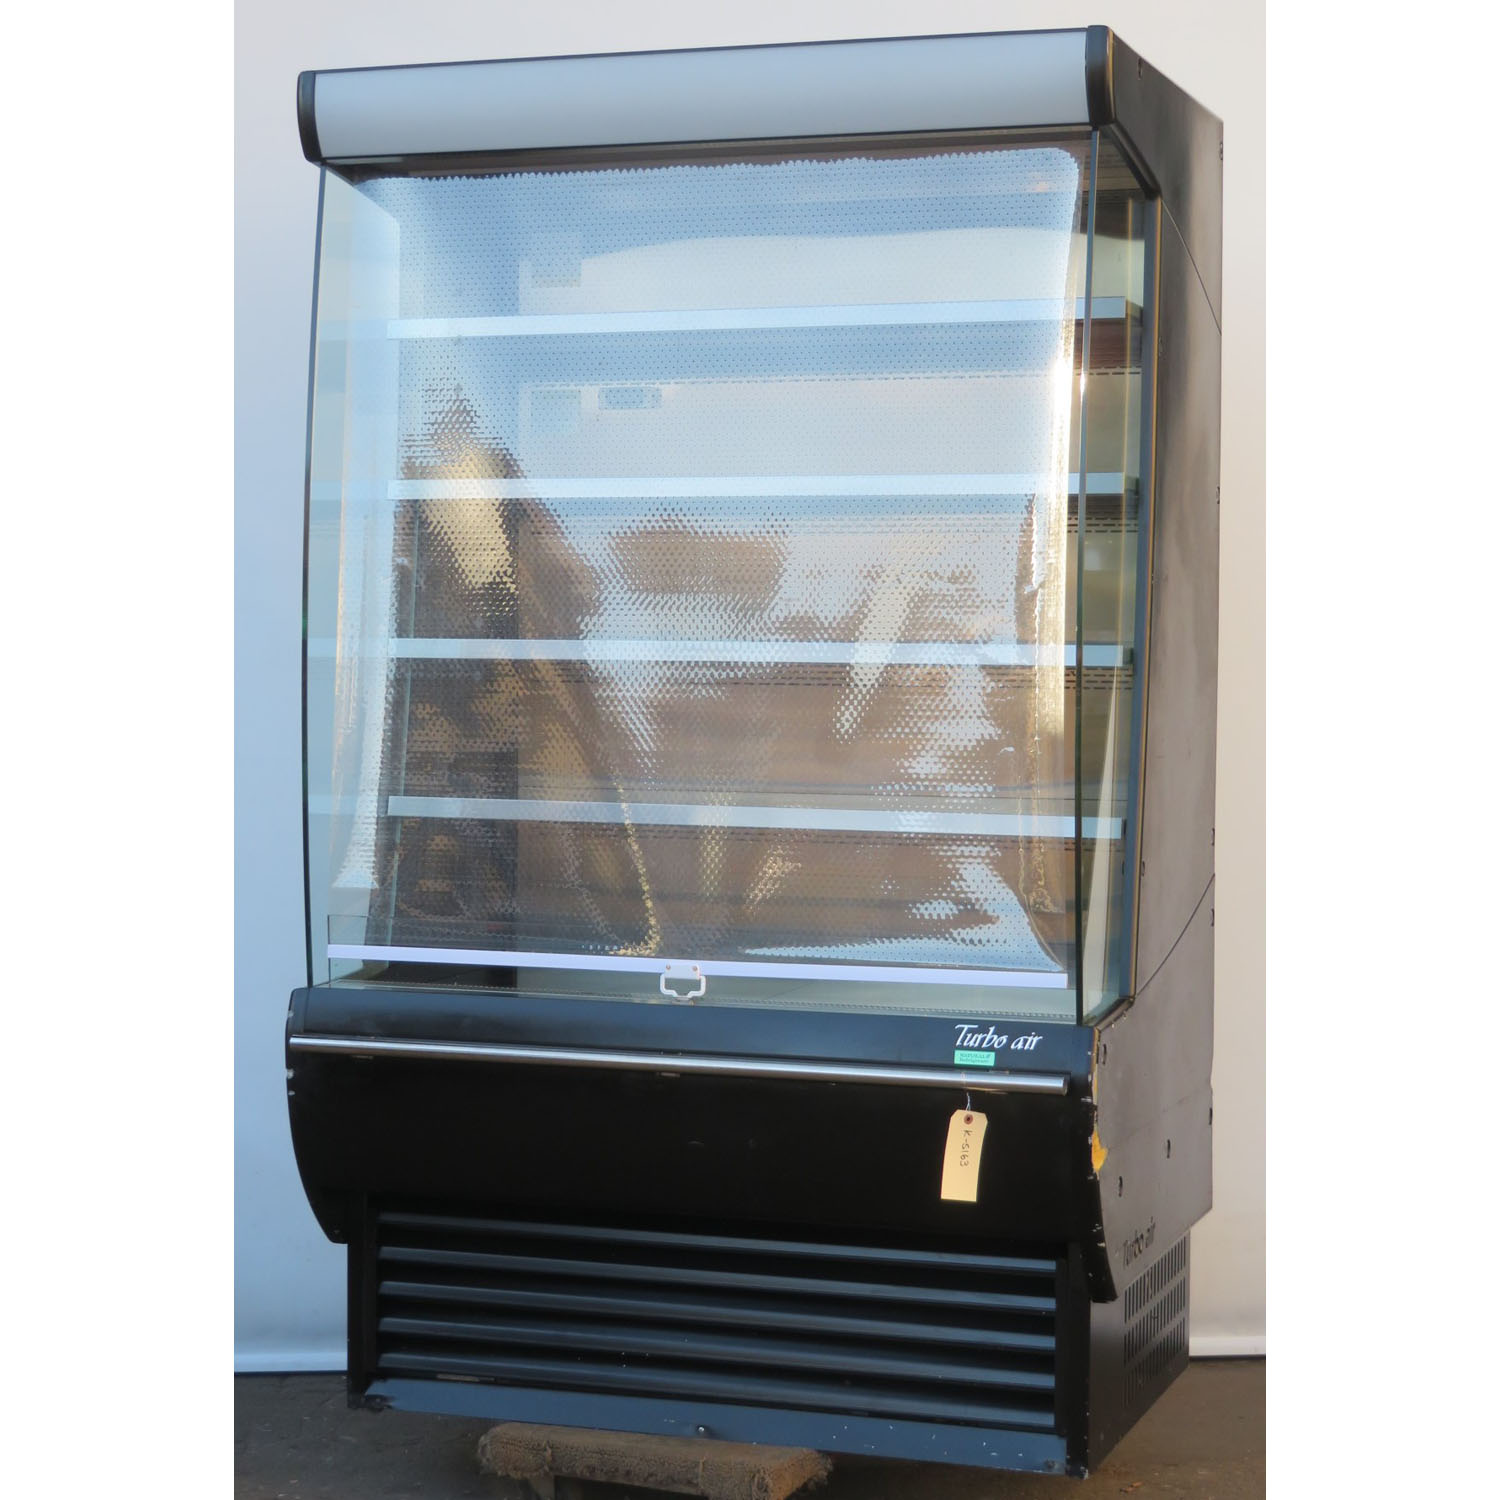 Turbo Air TOM-48DXB-N 48" Open Case Refrigerator, Used Excellent Condition image 1